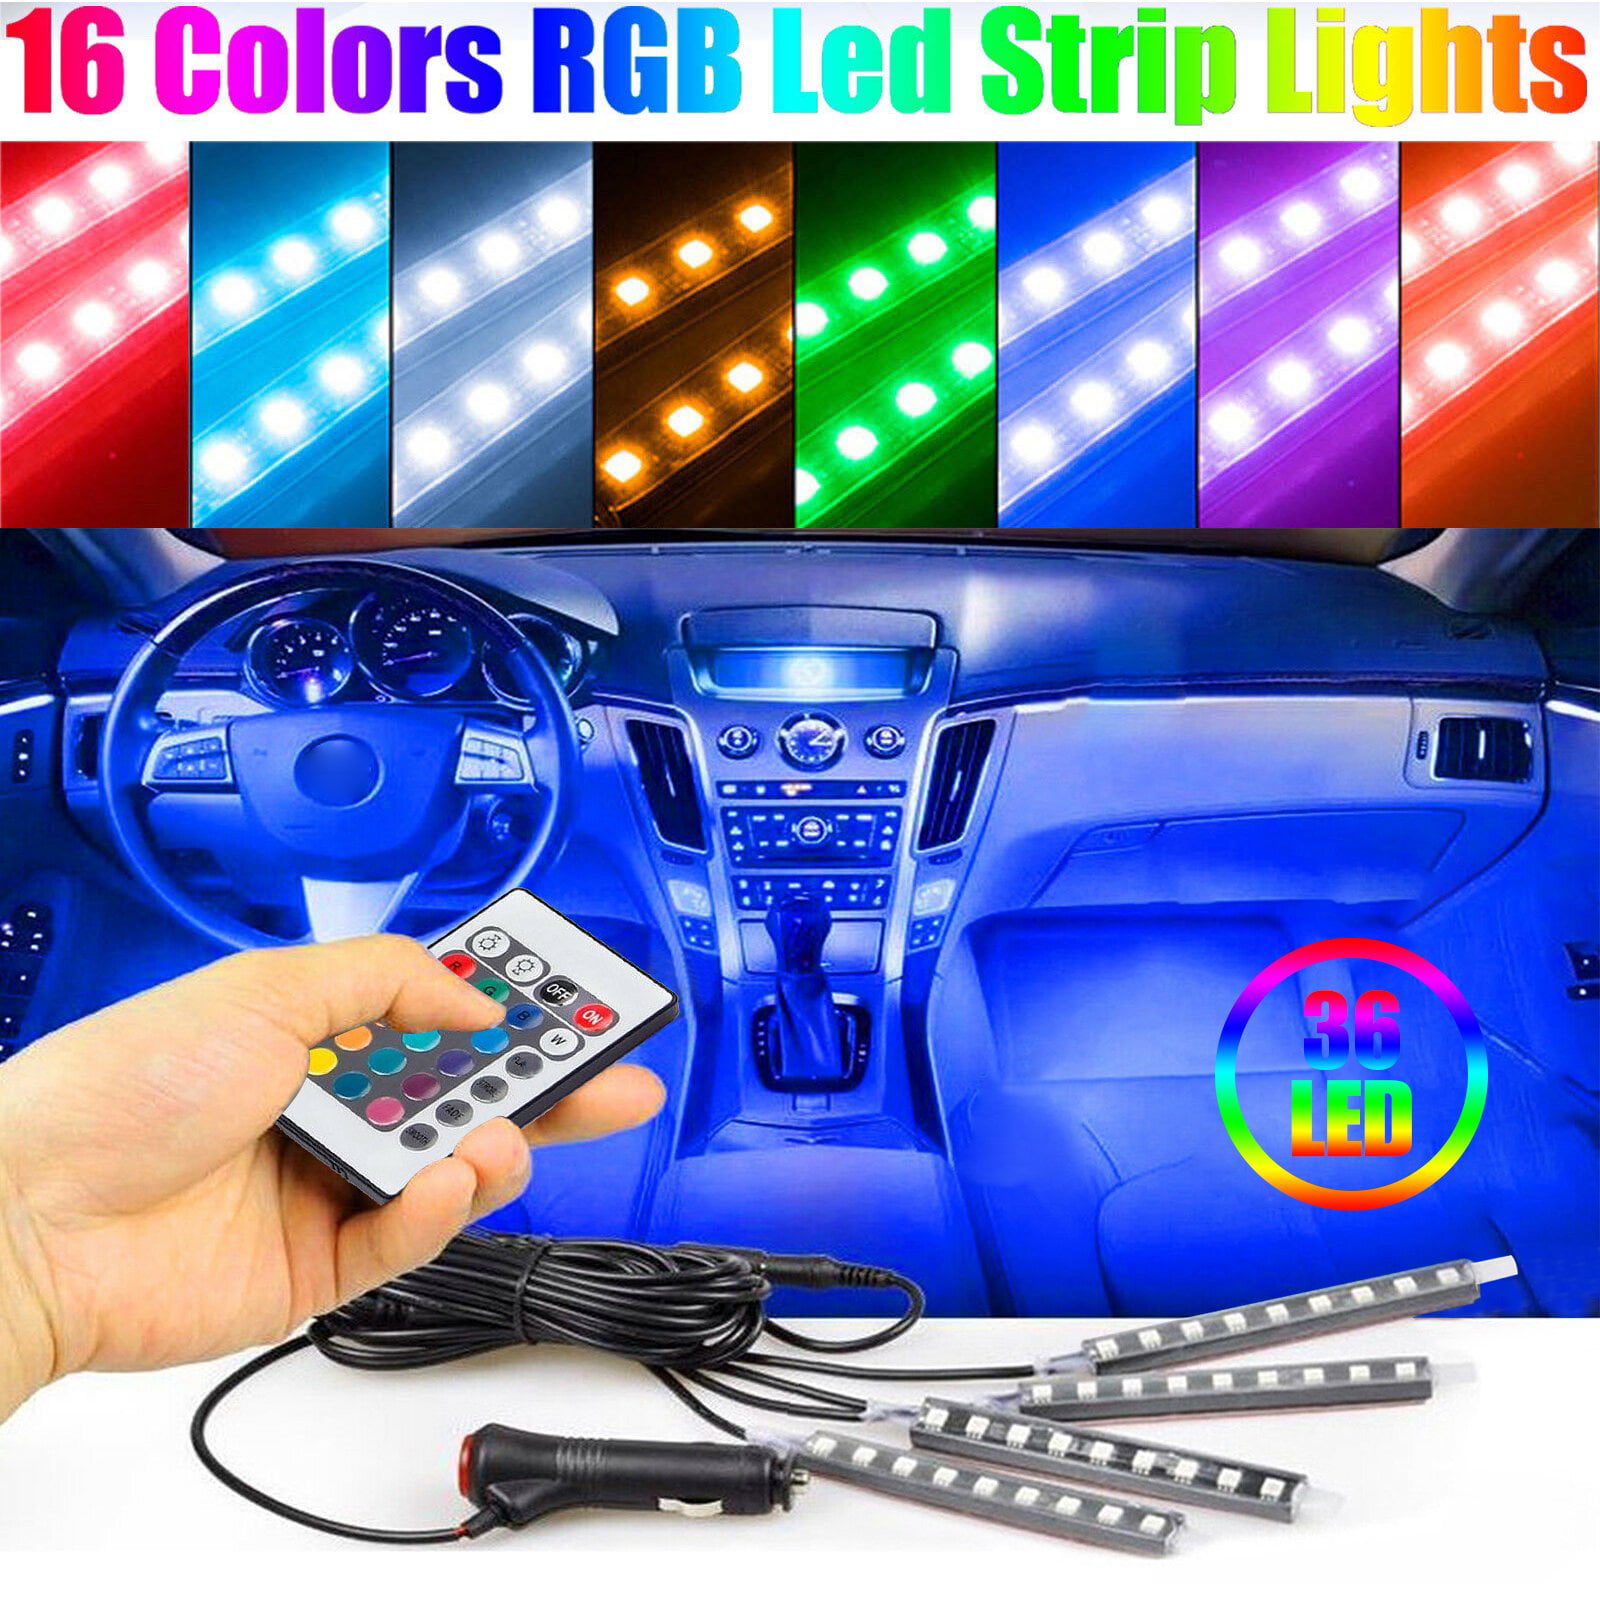 4 x 12 LED neon interior footwell decor lights strip lamp For Audi Cars 